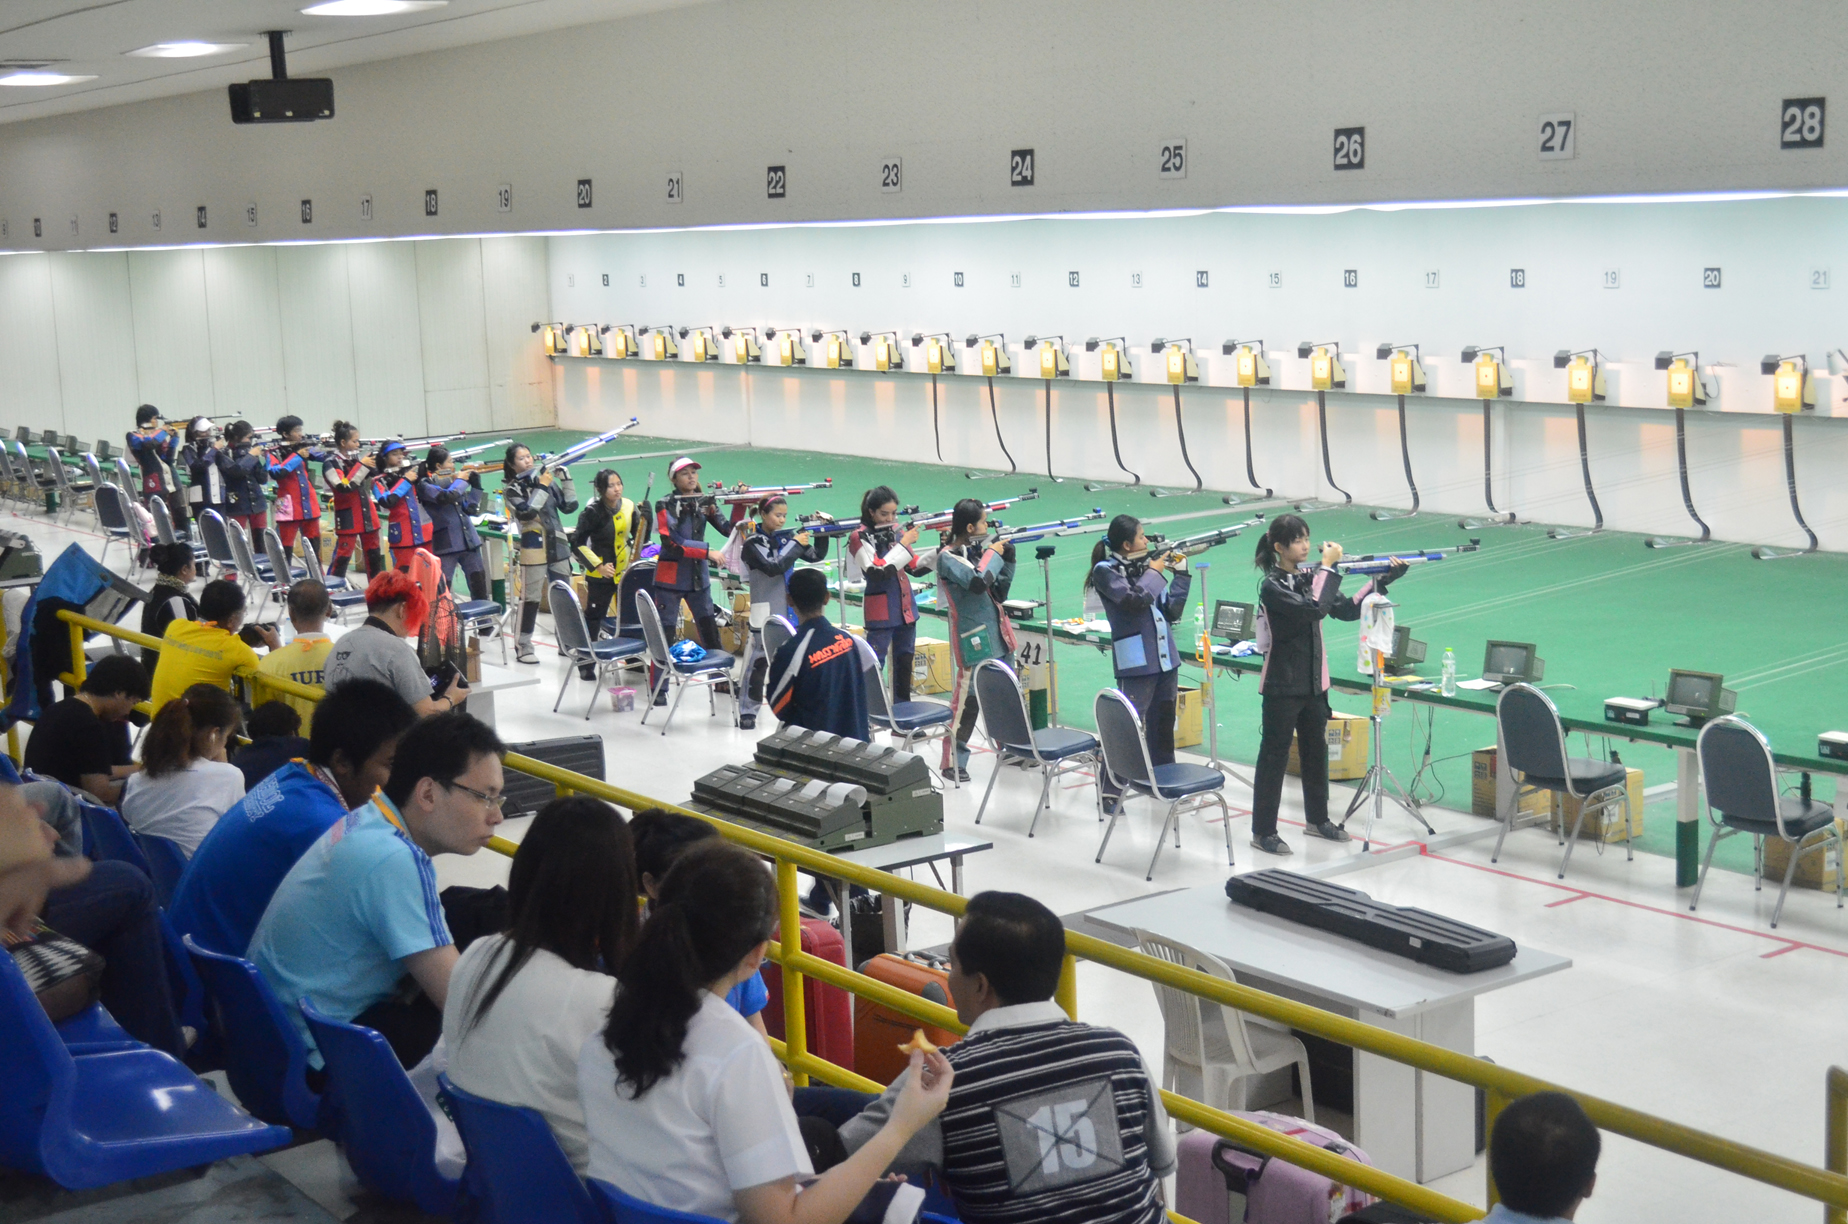 2021 ISSF World Cup to be held in Croatia from June 22 - July 3